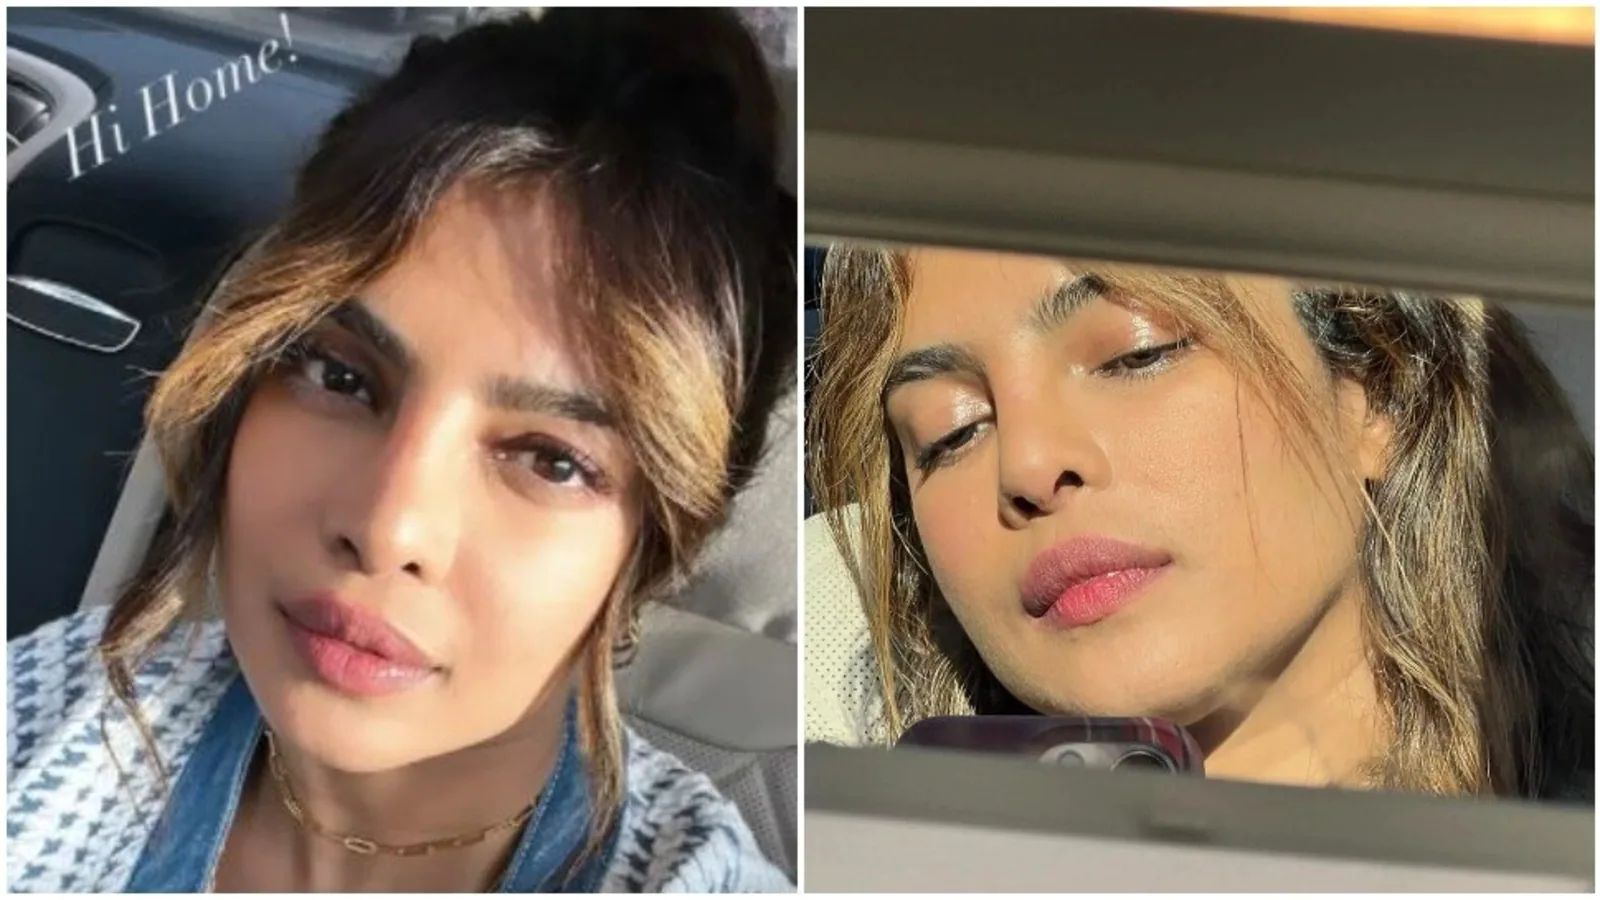 Priyanka Chopra returns home to celebrate first Holi with daughter in LA after her ‘whirlwind trip to Rome’. See pics